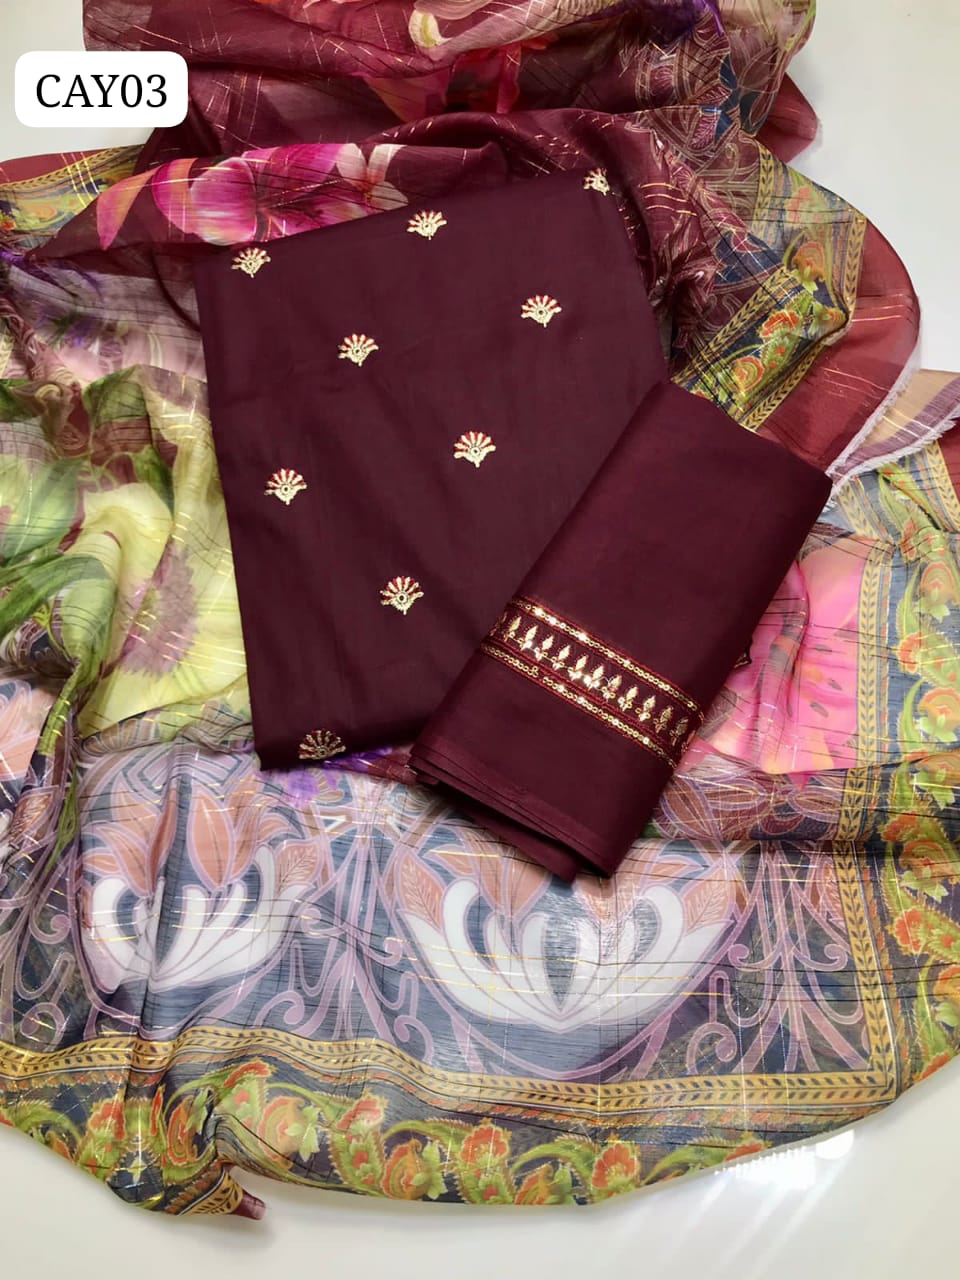 Monar Lawn Fabric Front Embroidery Work Shirt With Monar Lawn Digital Dupatta And Monar Lawn Embroidery Trouser 3pc Dress